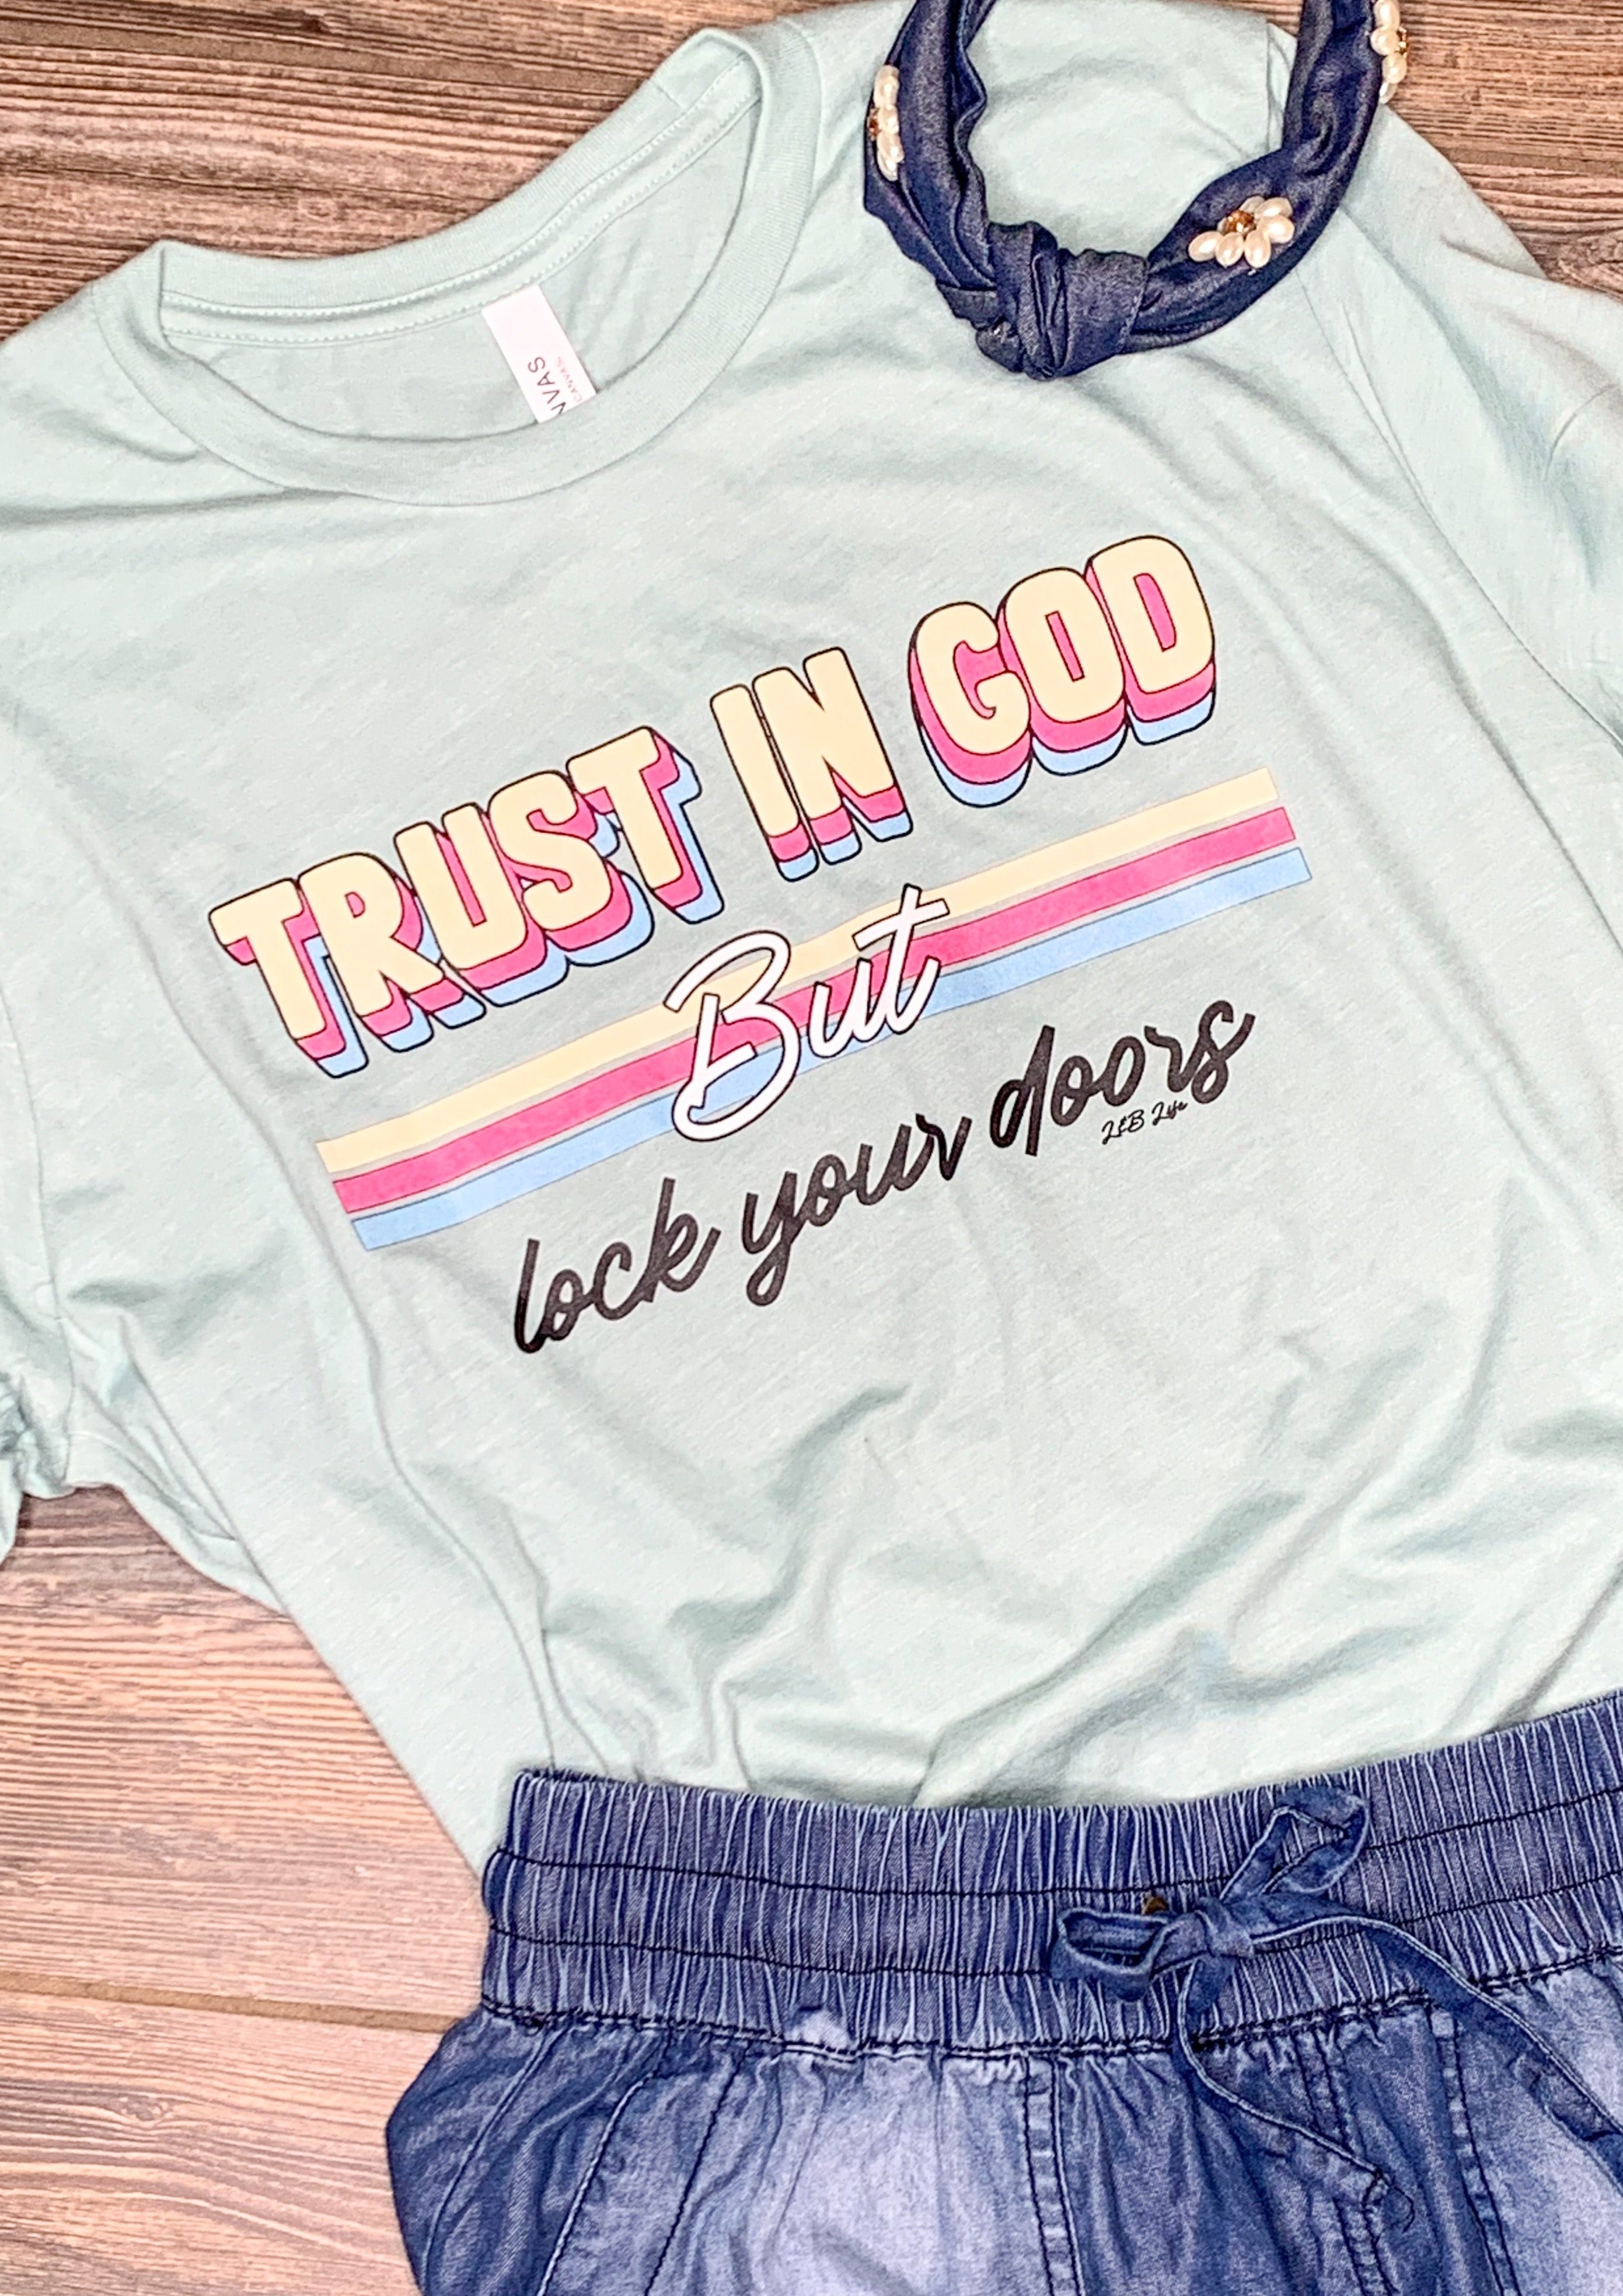 A light dusty blue tee shirt that says "Trust in God but lock your doors" with the colors black, white, pink, blue, and yellow.